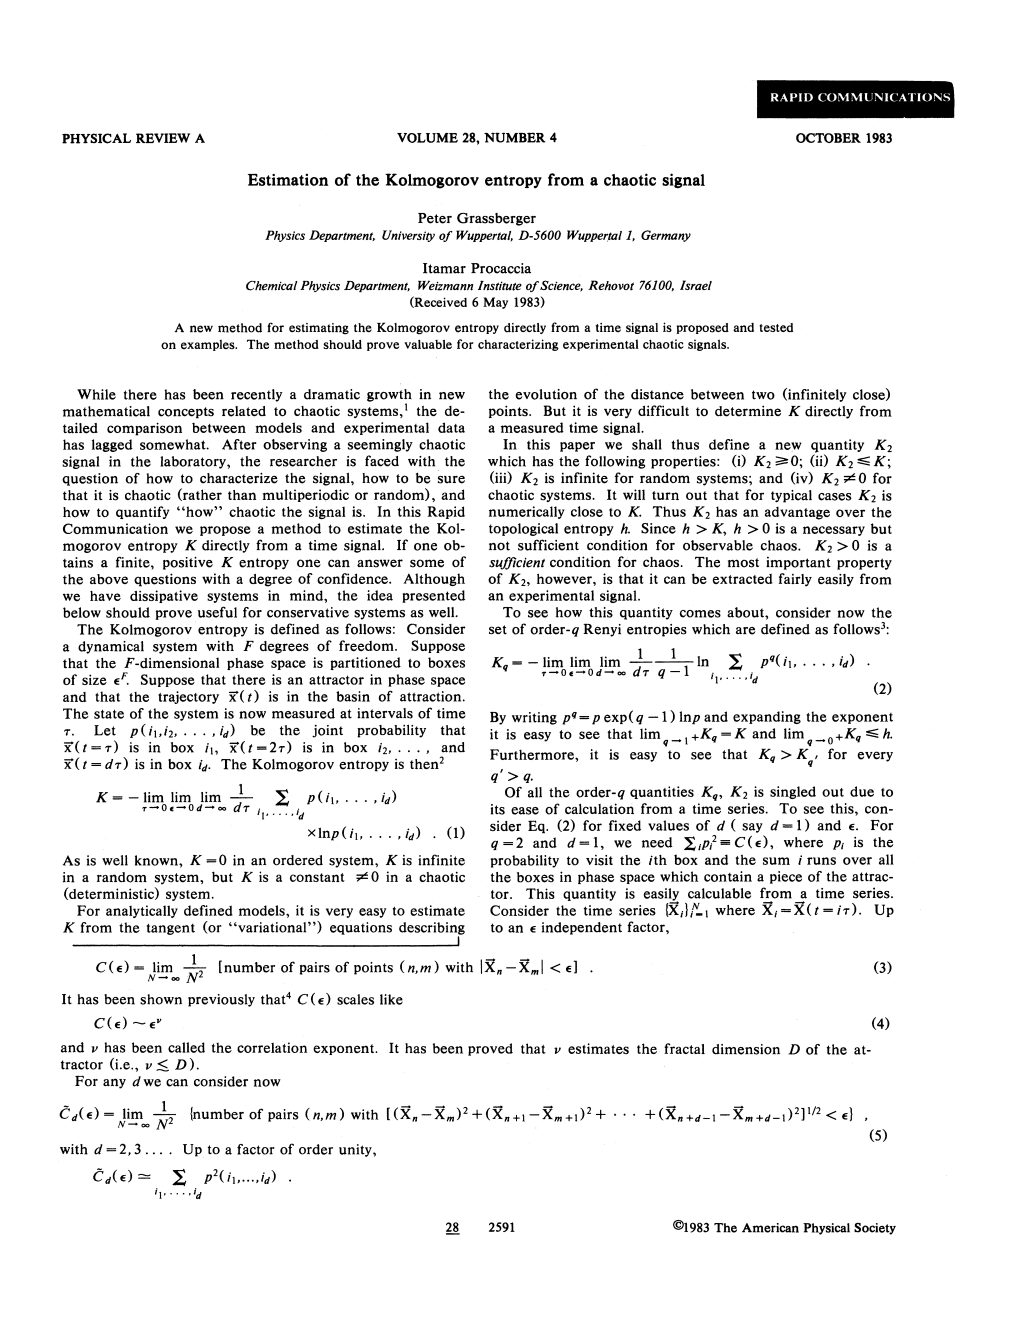 Estimation of the Kolmogorov Entropy from a Chaotic Signal